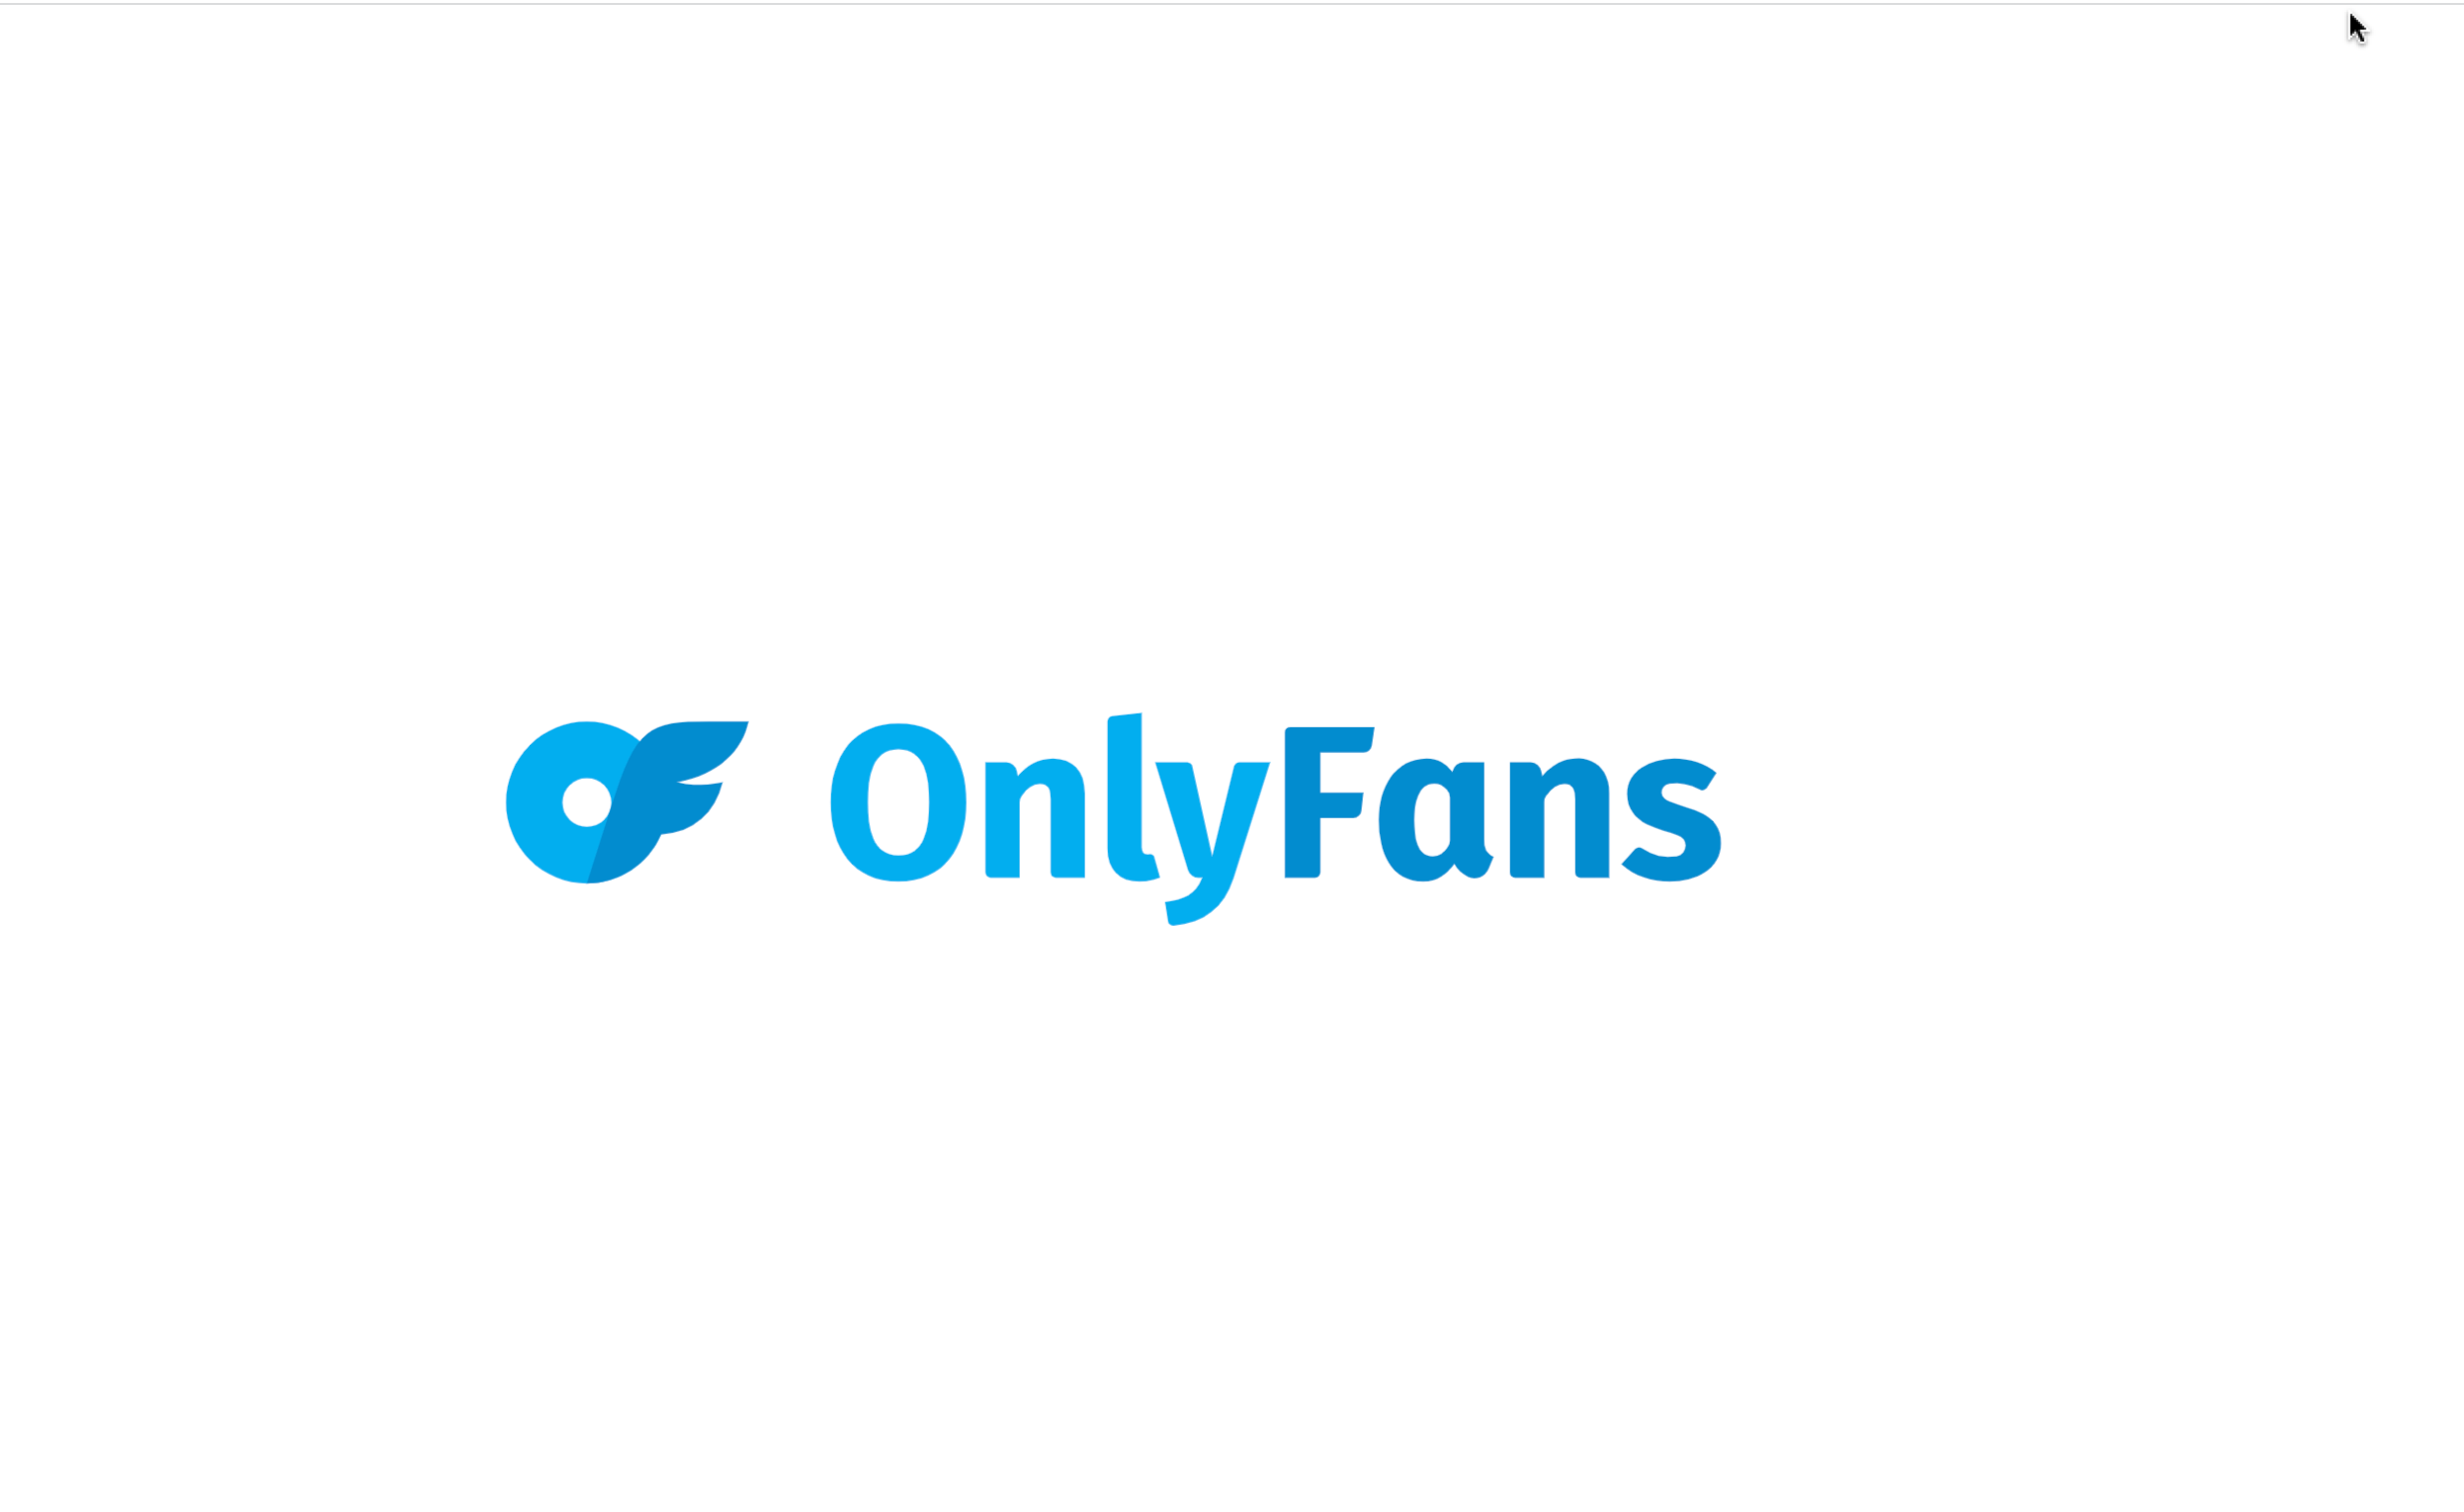 How to Find Someone on OnlyFans by Email